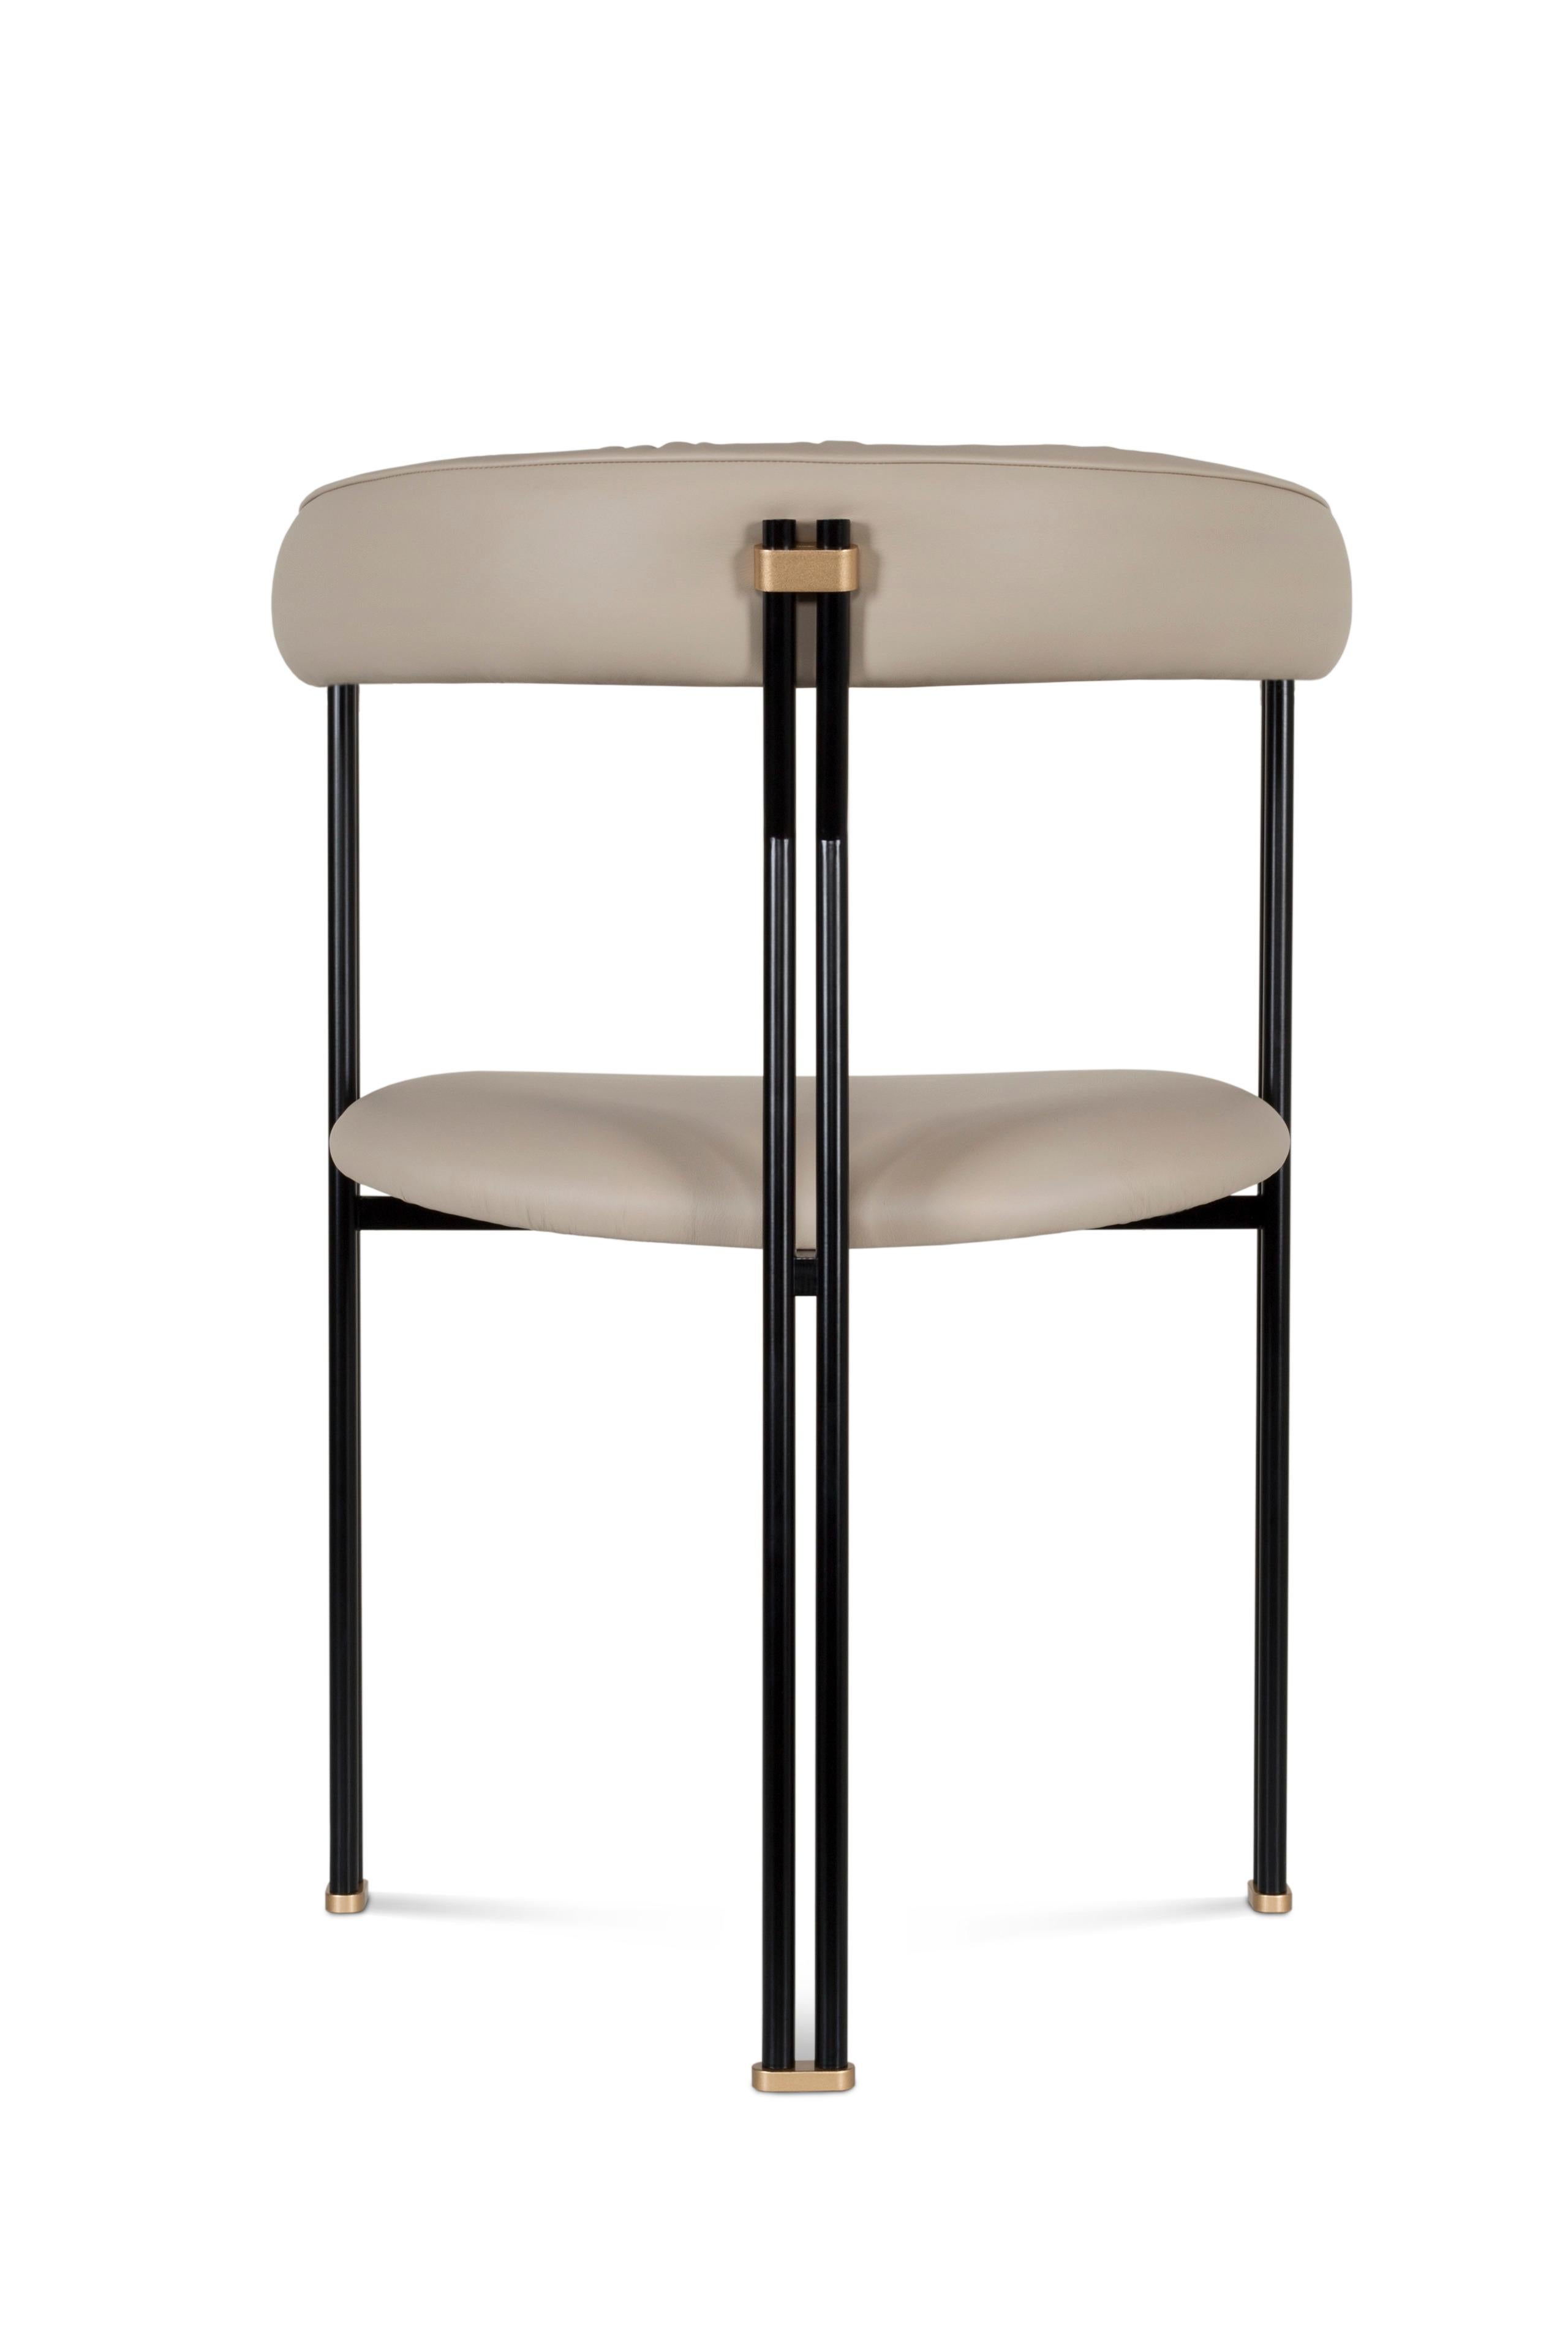 Brass Modern Maia Dining Chairs, Blue Italian Leather, Handmade Portugal by Greenapple For Sale